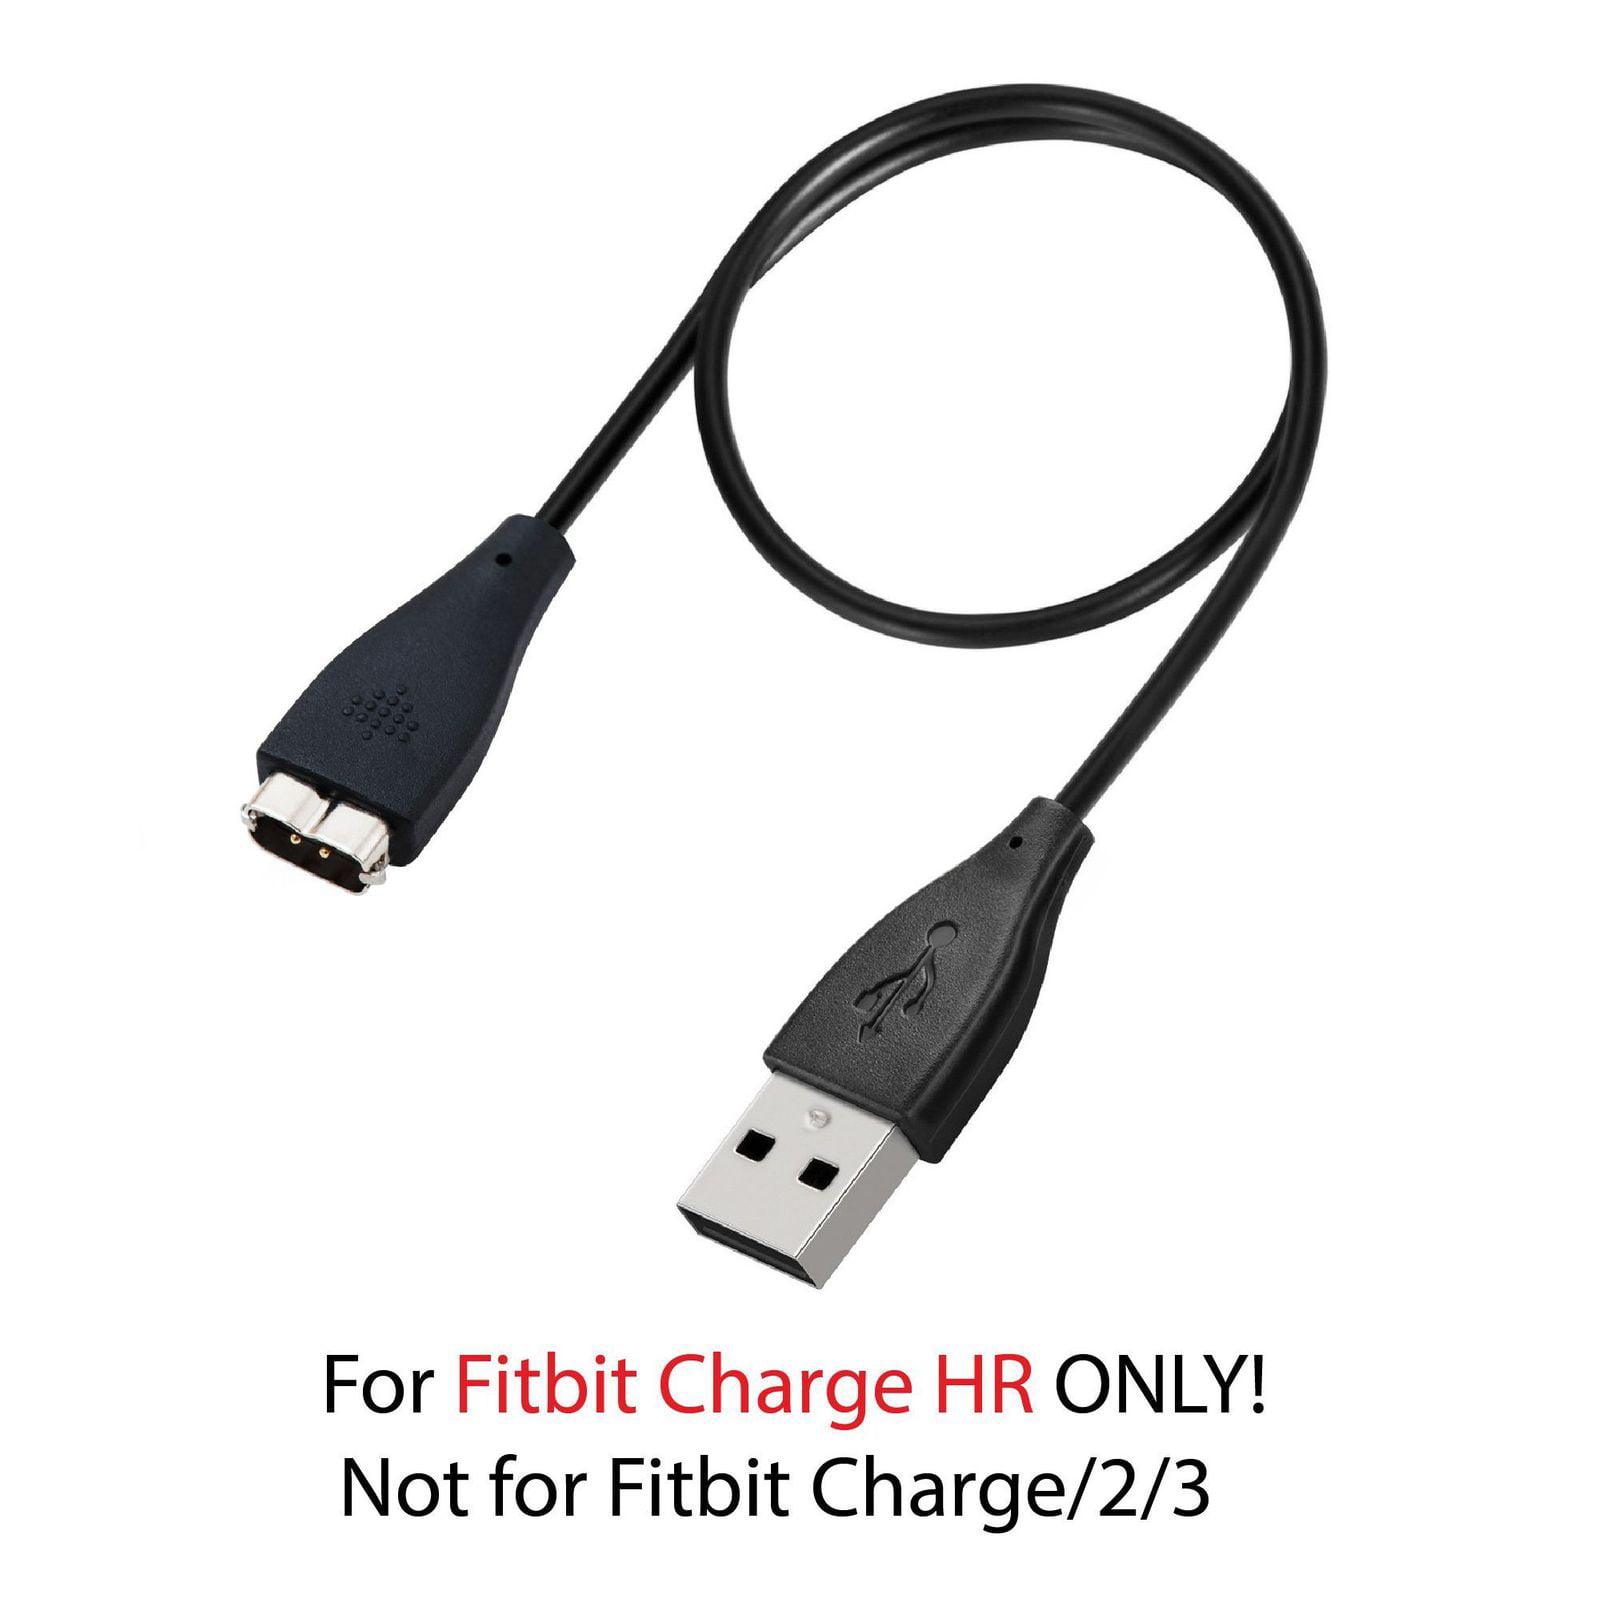 Replacement USB Charger Cable Cord Charging For Fitbit Flex 2 Tracker Wristband 